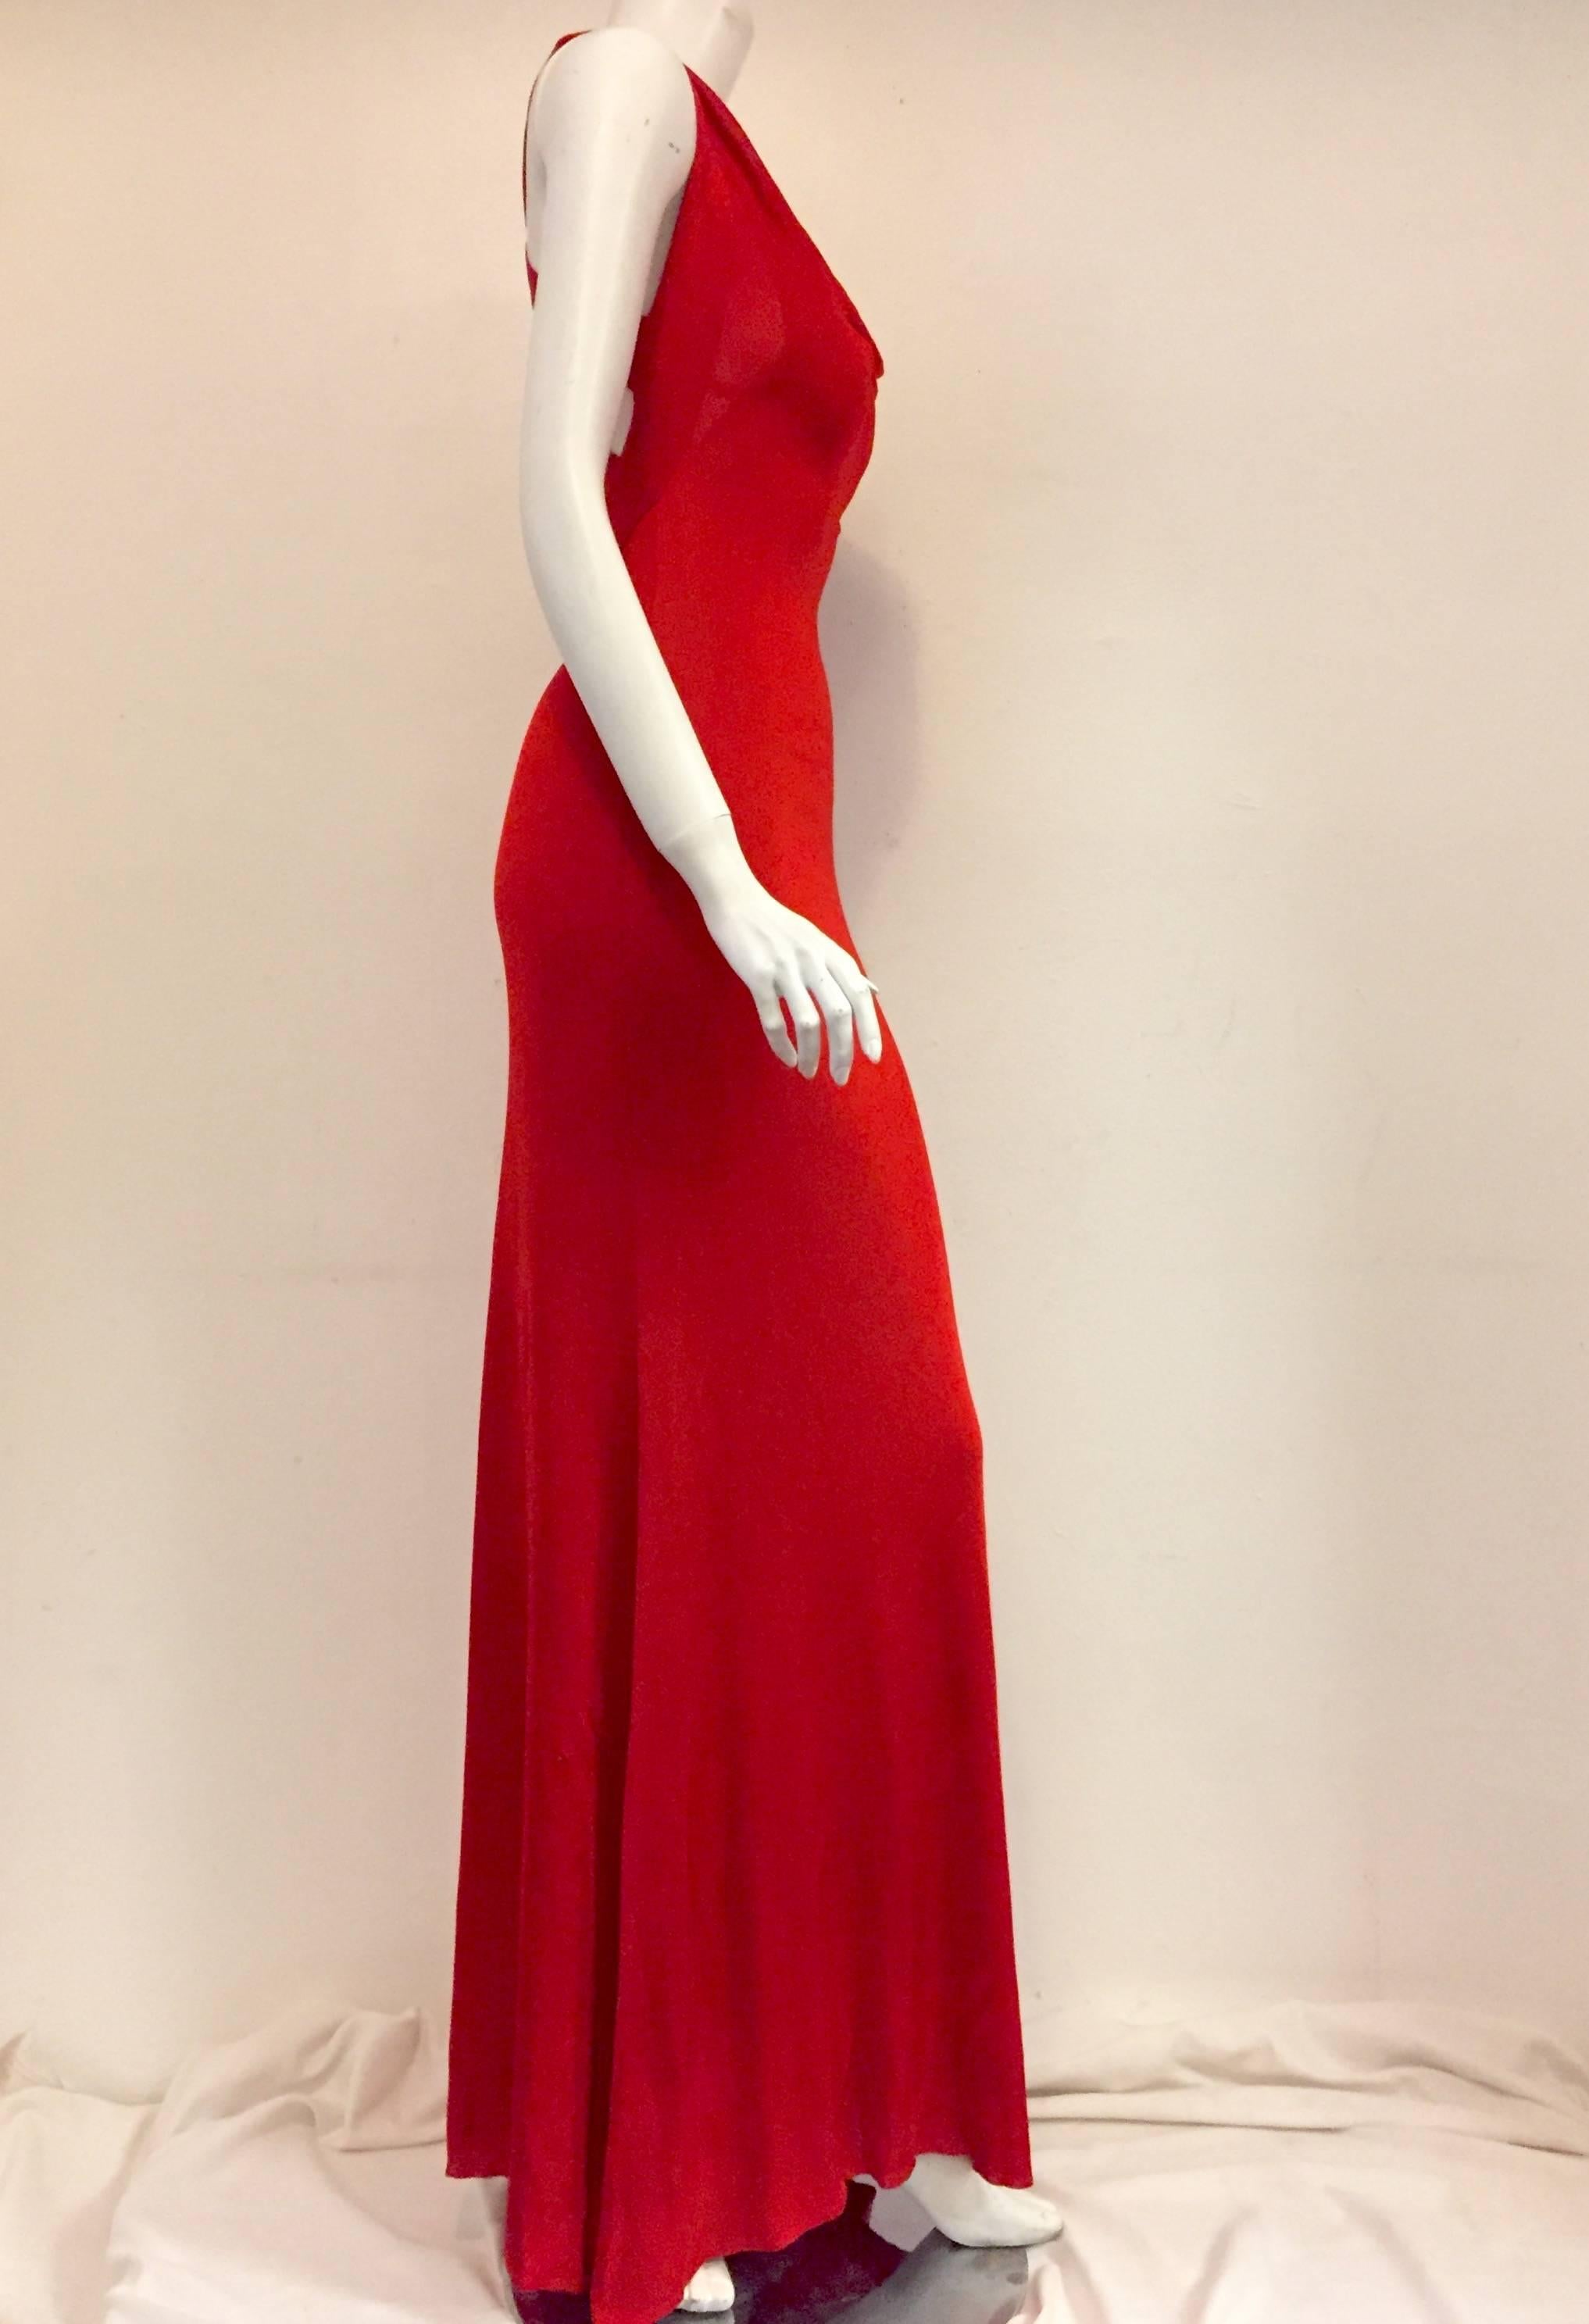 Fit for a siren, this striking Red Alexander McQueen gown features crisscross straps on back and scalloped neck in front. Crafted from luxurious 100% viscose this gown celebrates the natural curves of a woman and promises an unforgettable,